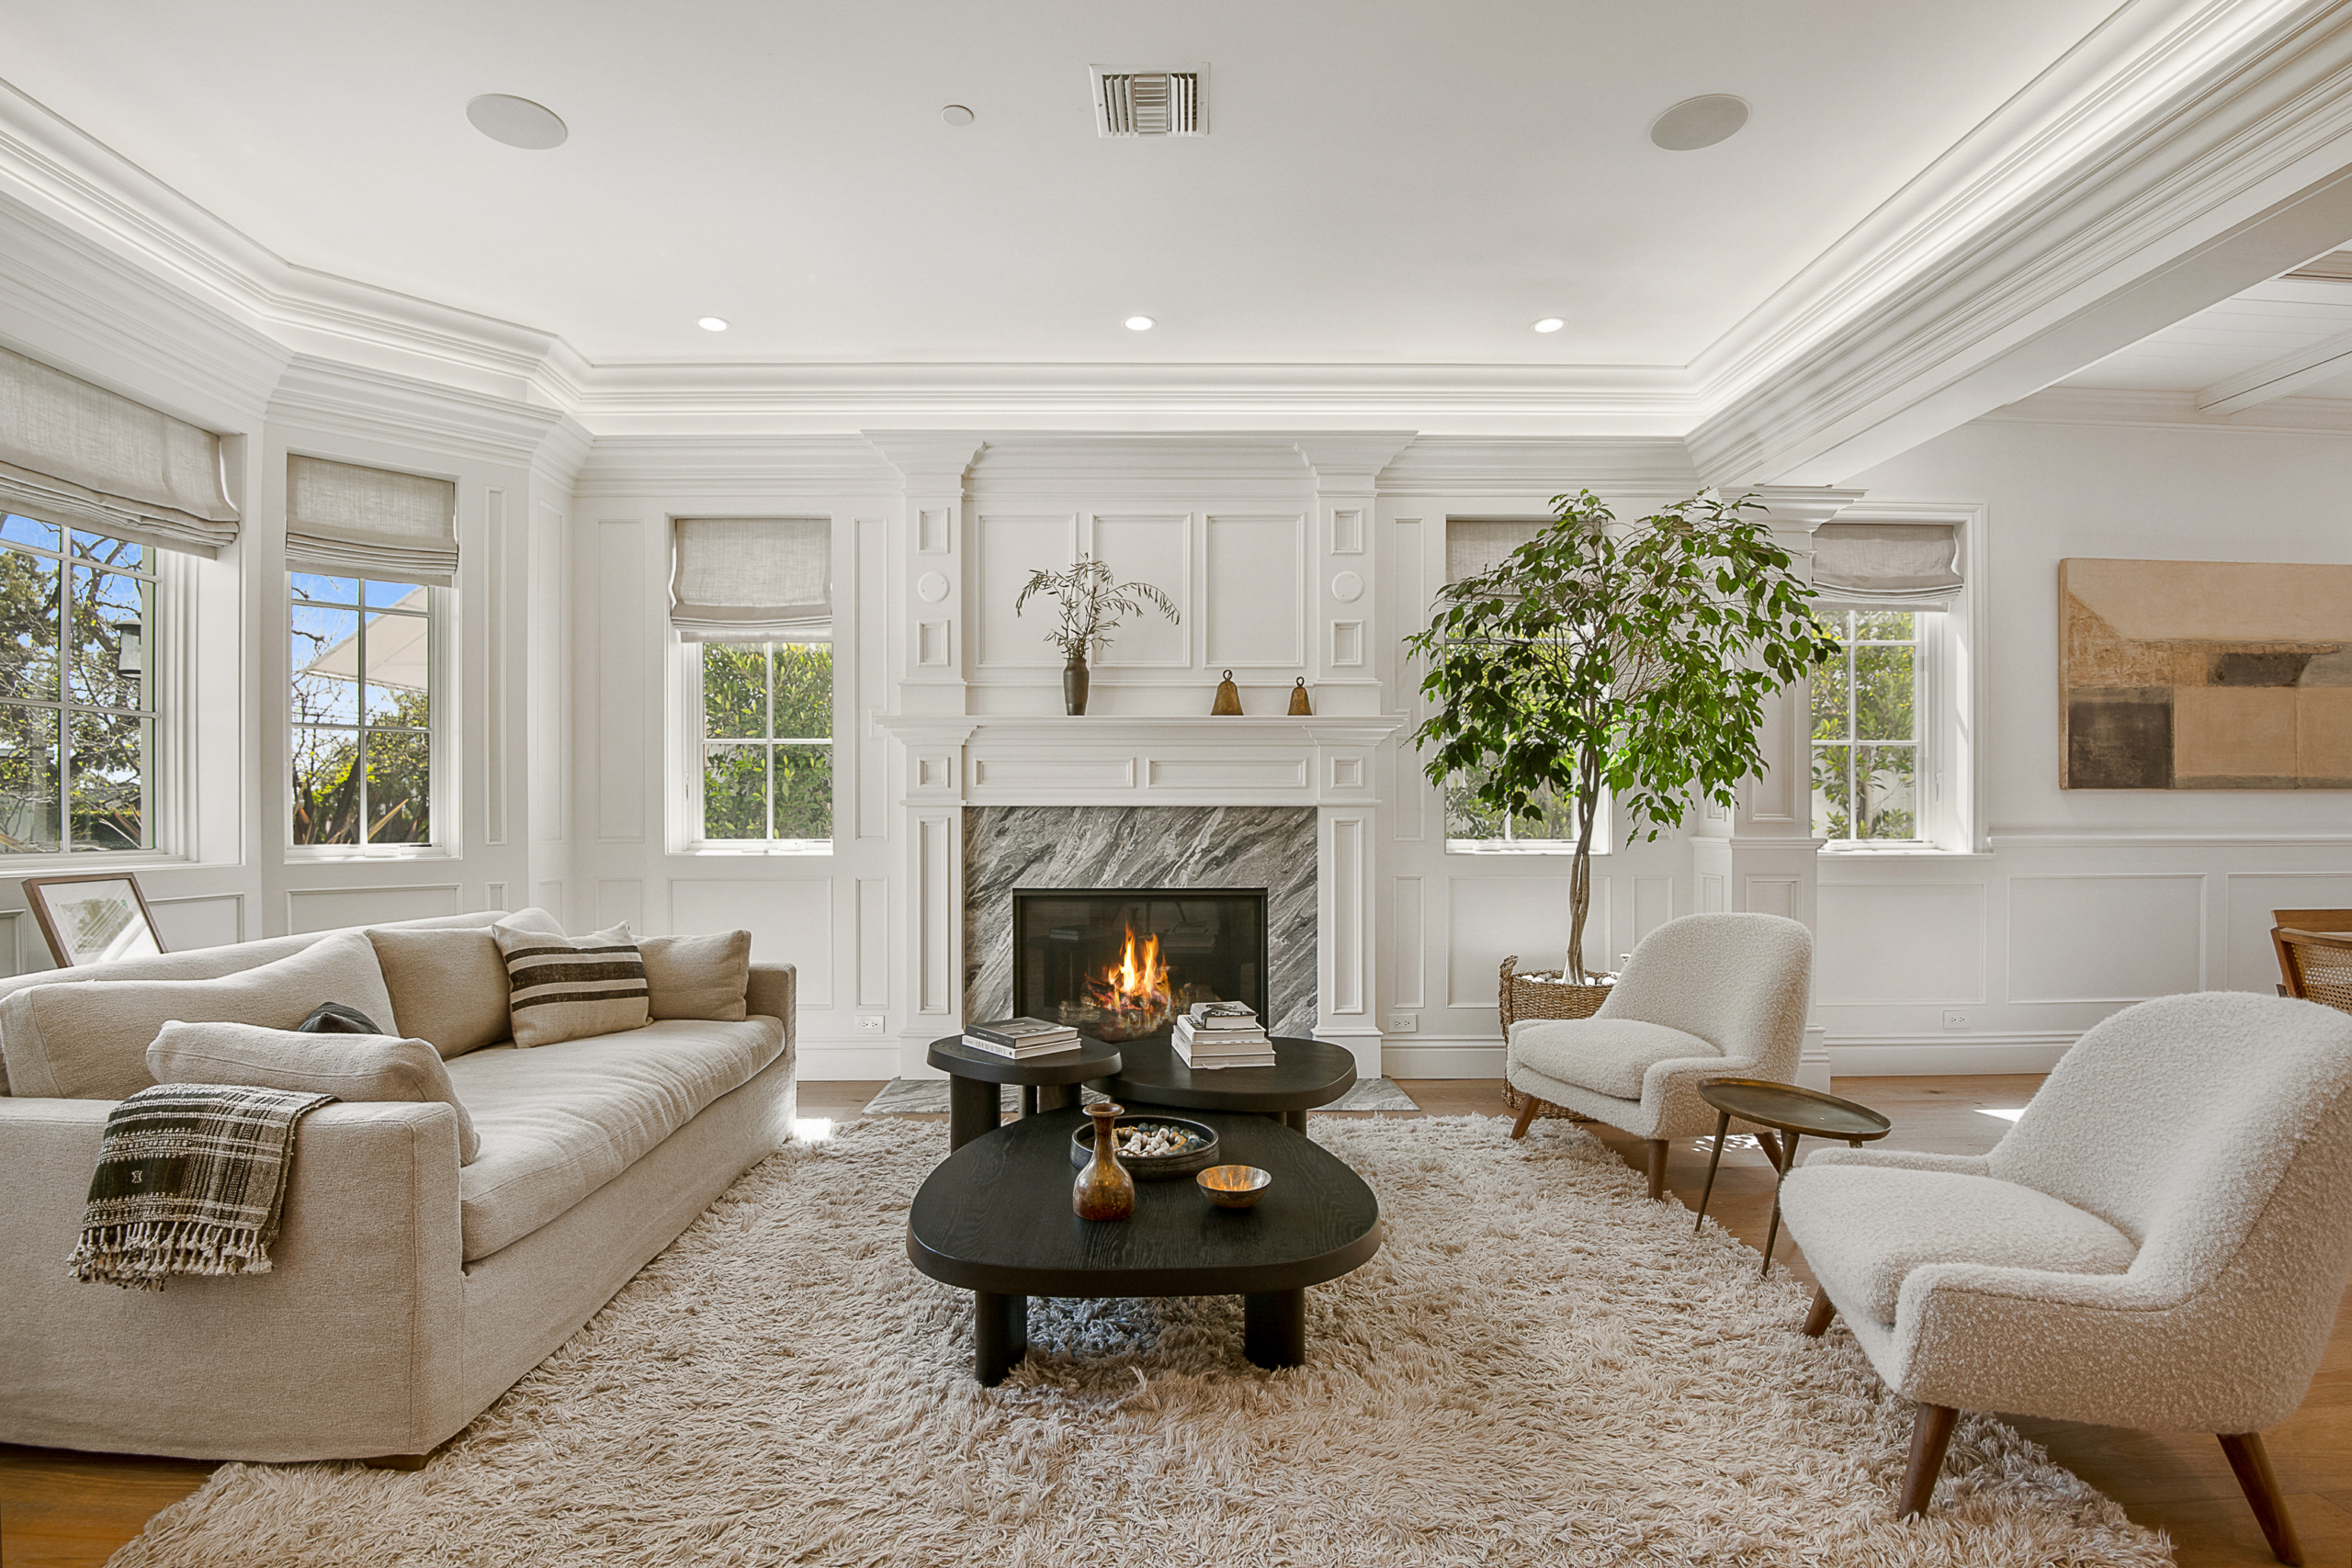 Large living room area with marble fireplace and crowned molding, vaulted ceiling